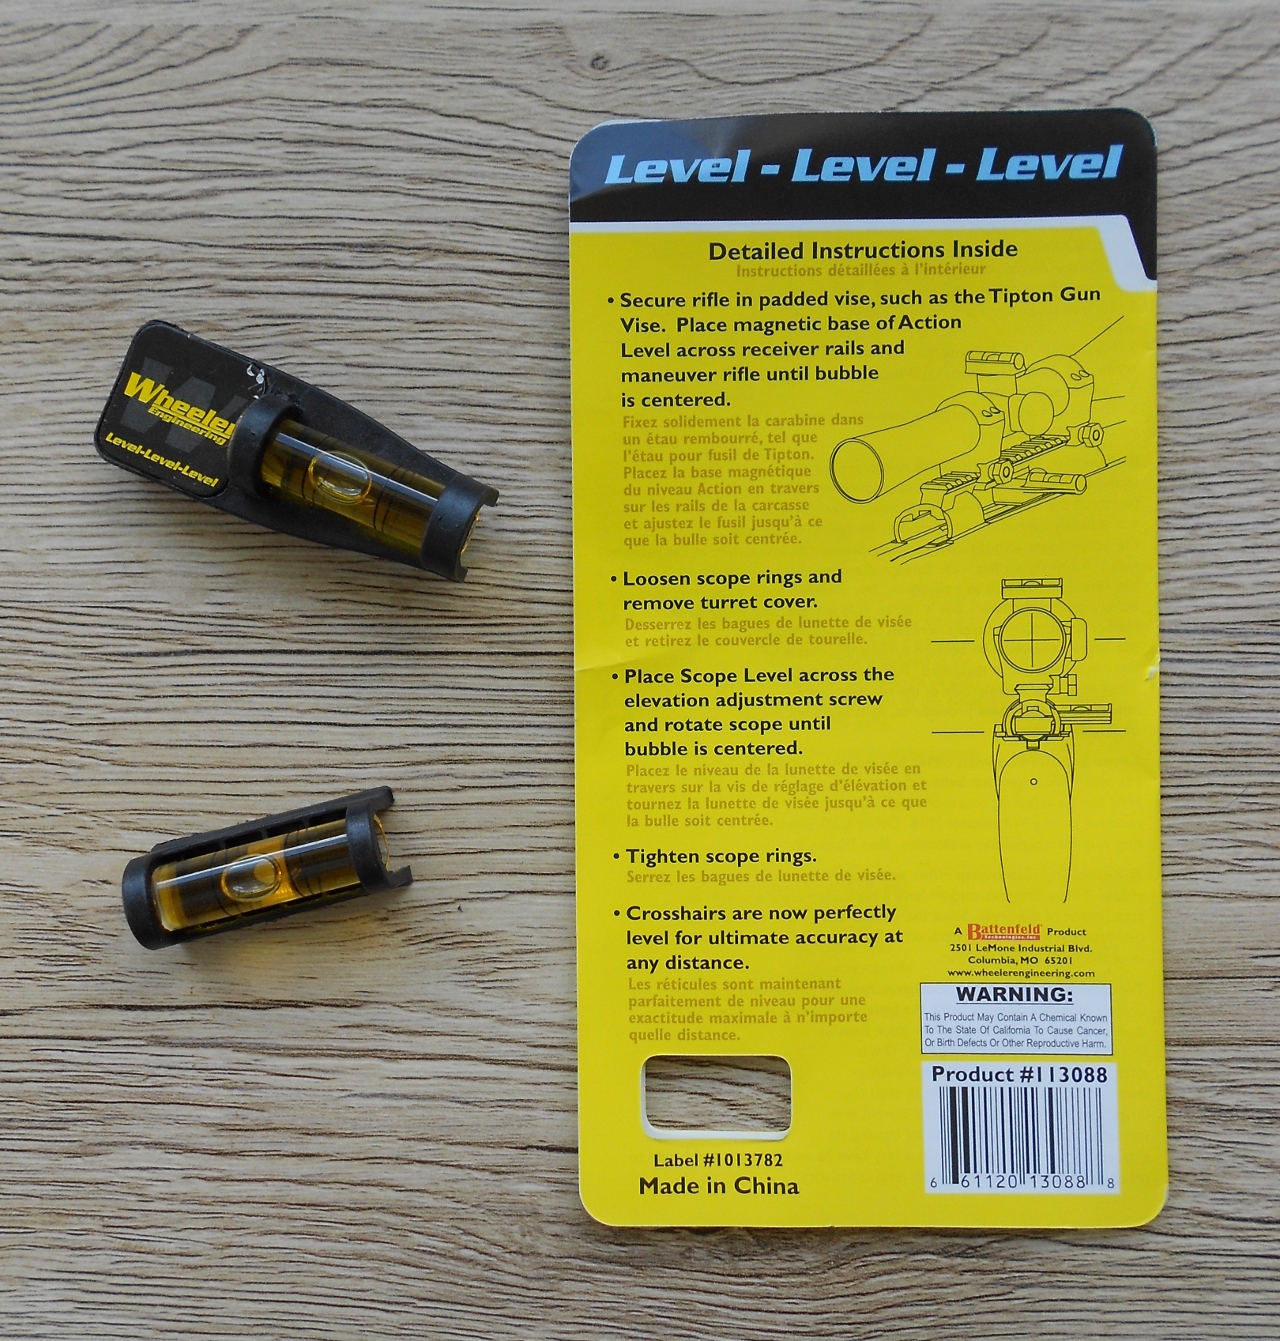 The Wheeler Engineering "Level Level Level" comprises two specially designed spirit levels.